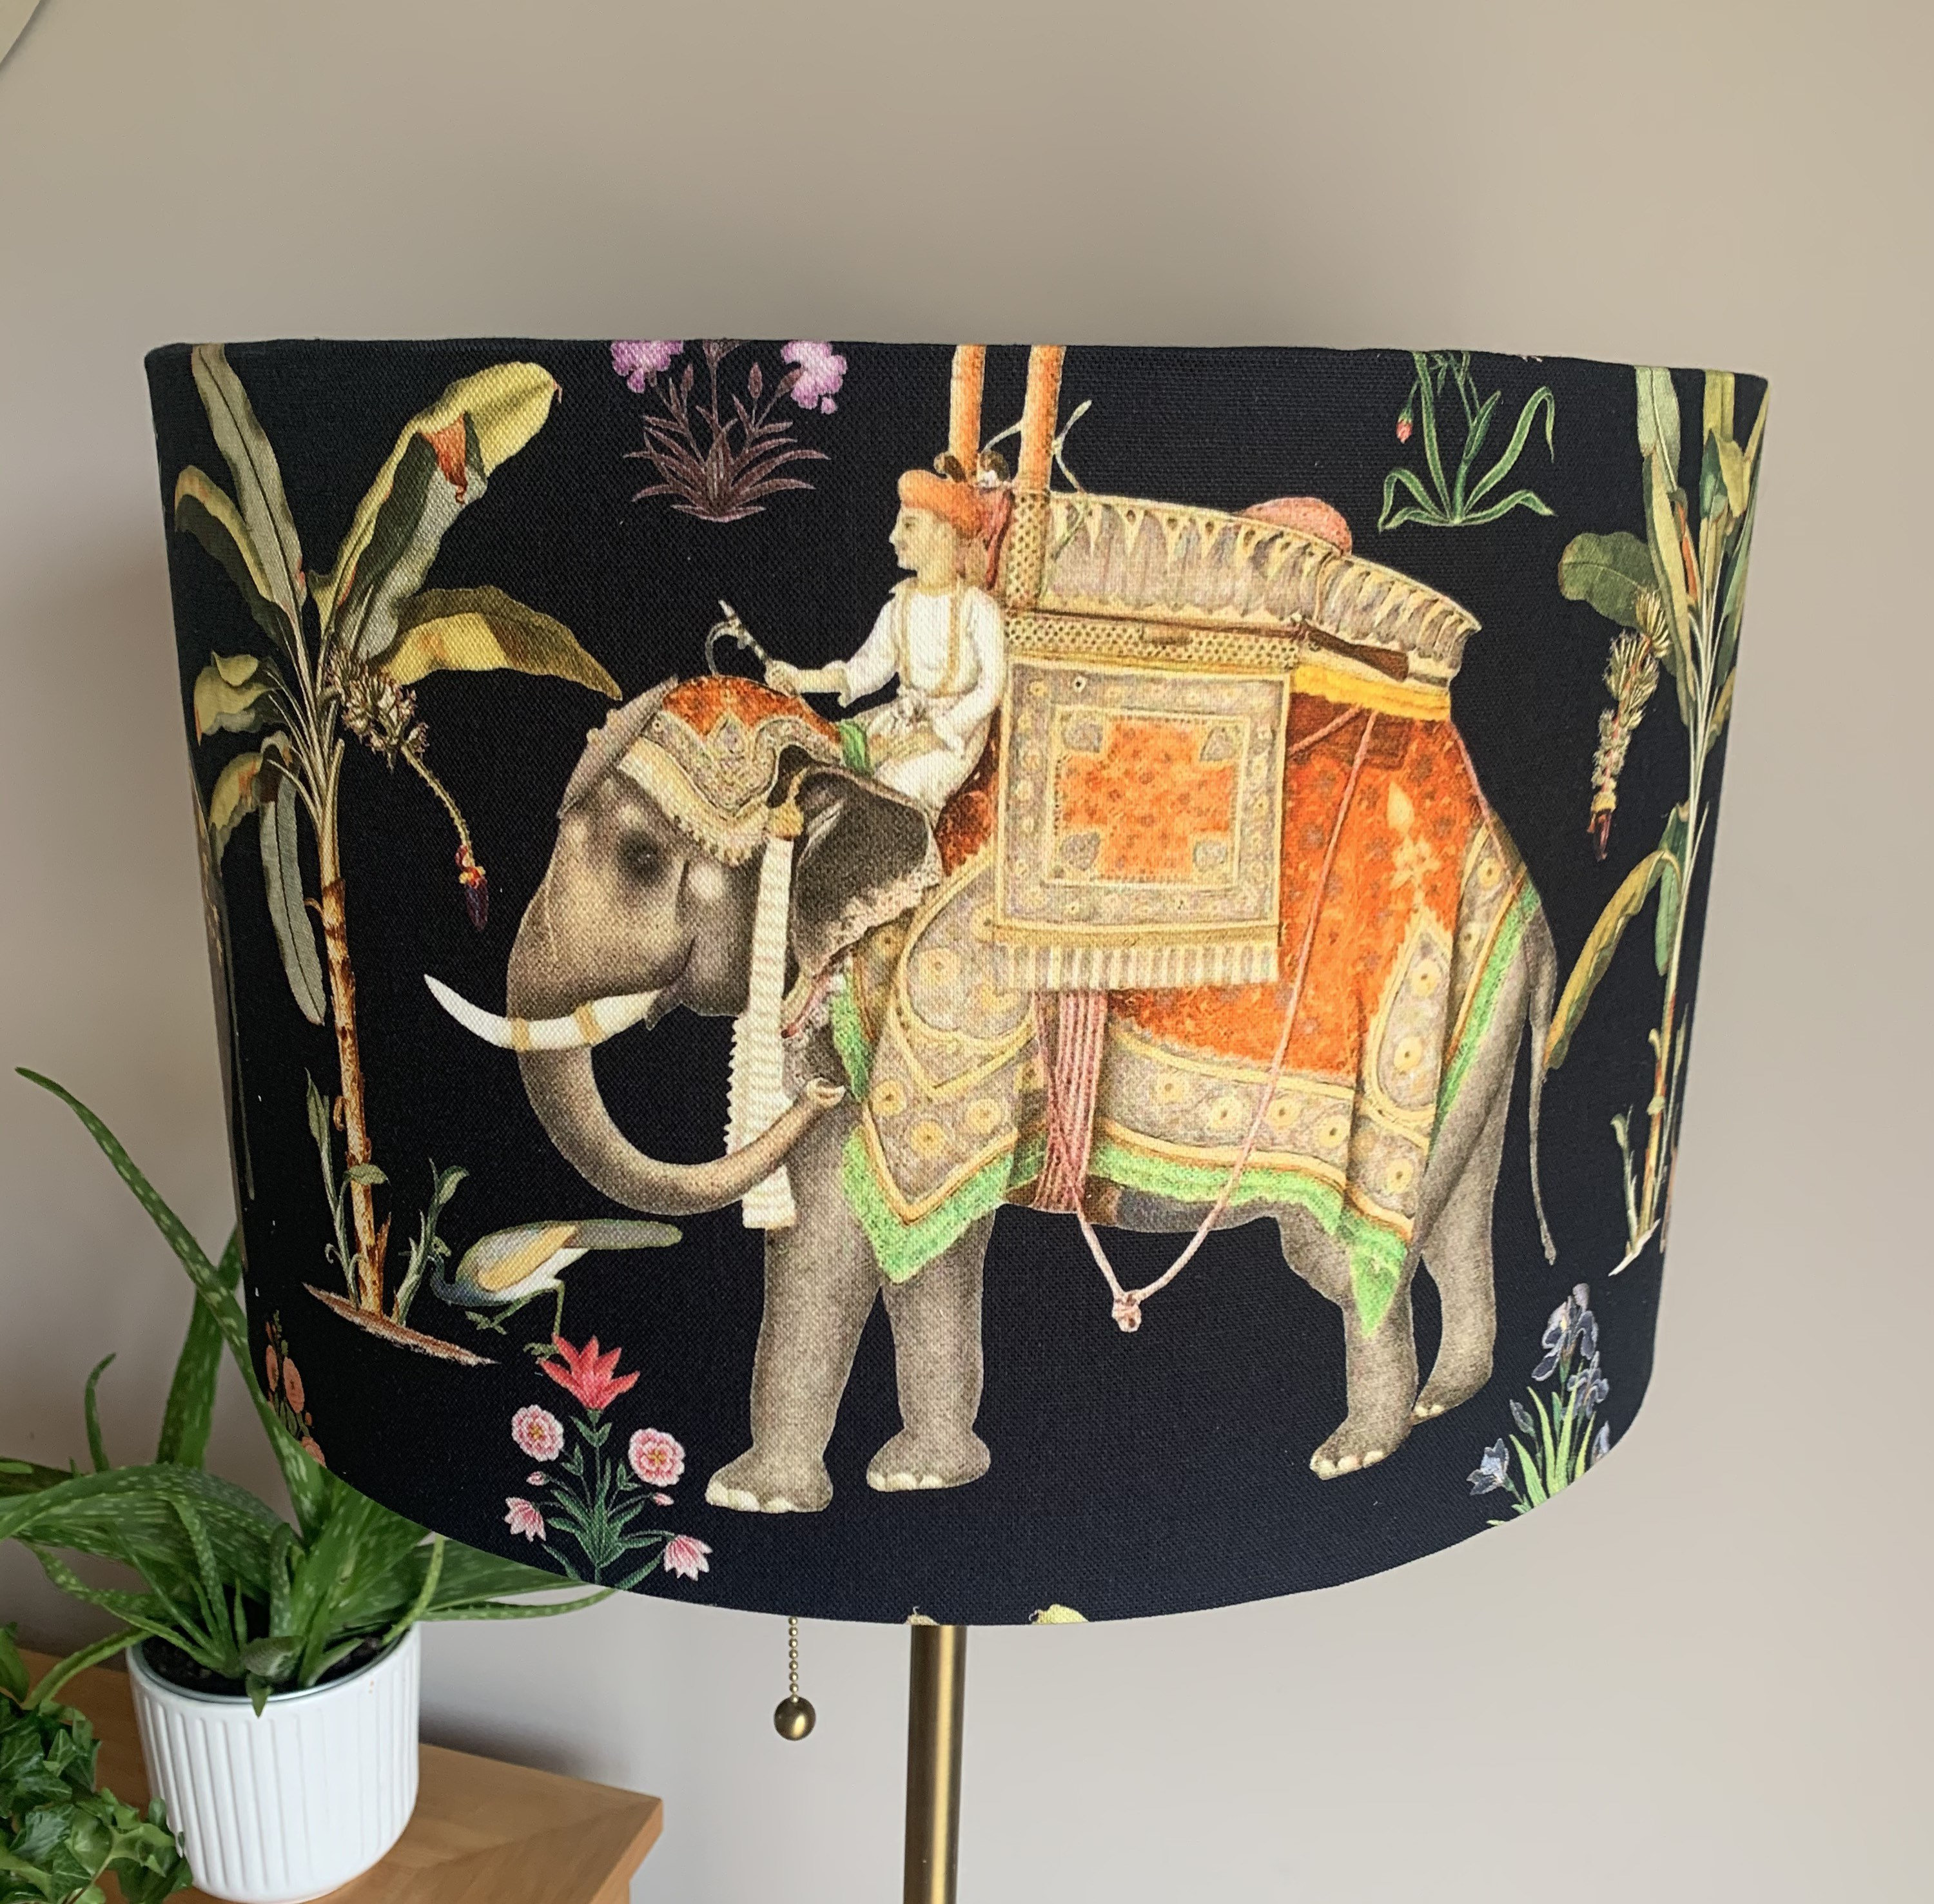 Modern/Contemporary Unique Indian Fabric Elephant Lampshade | Etsy